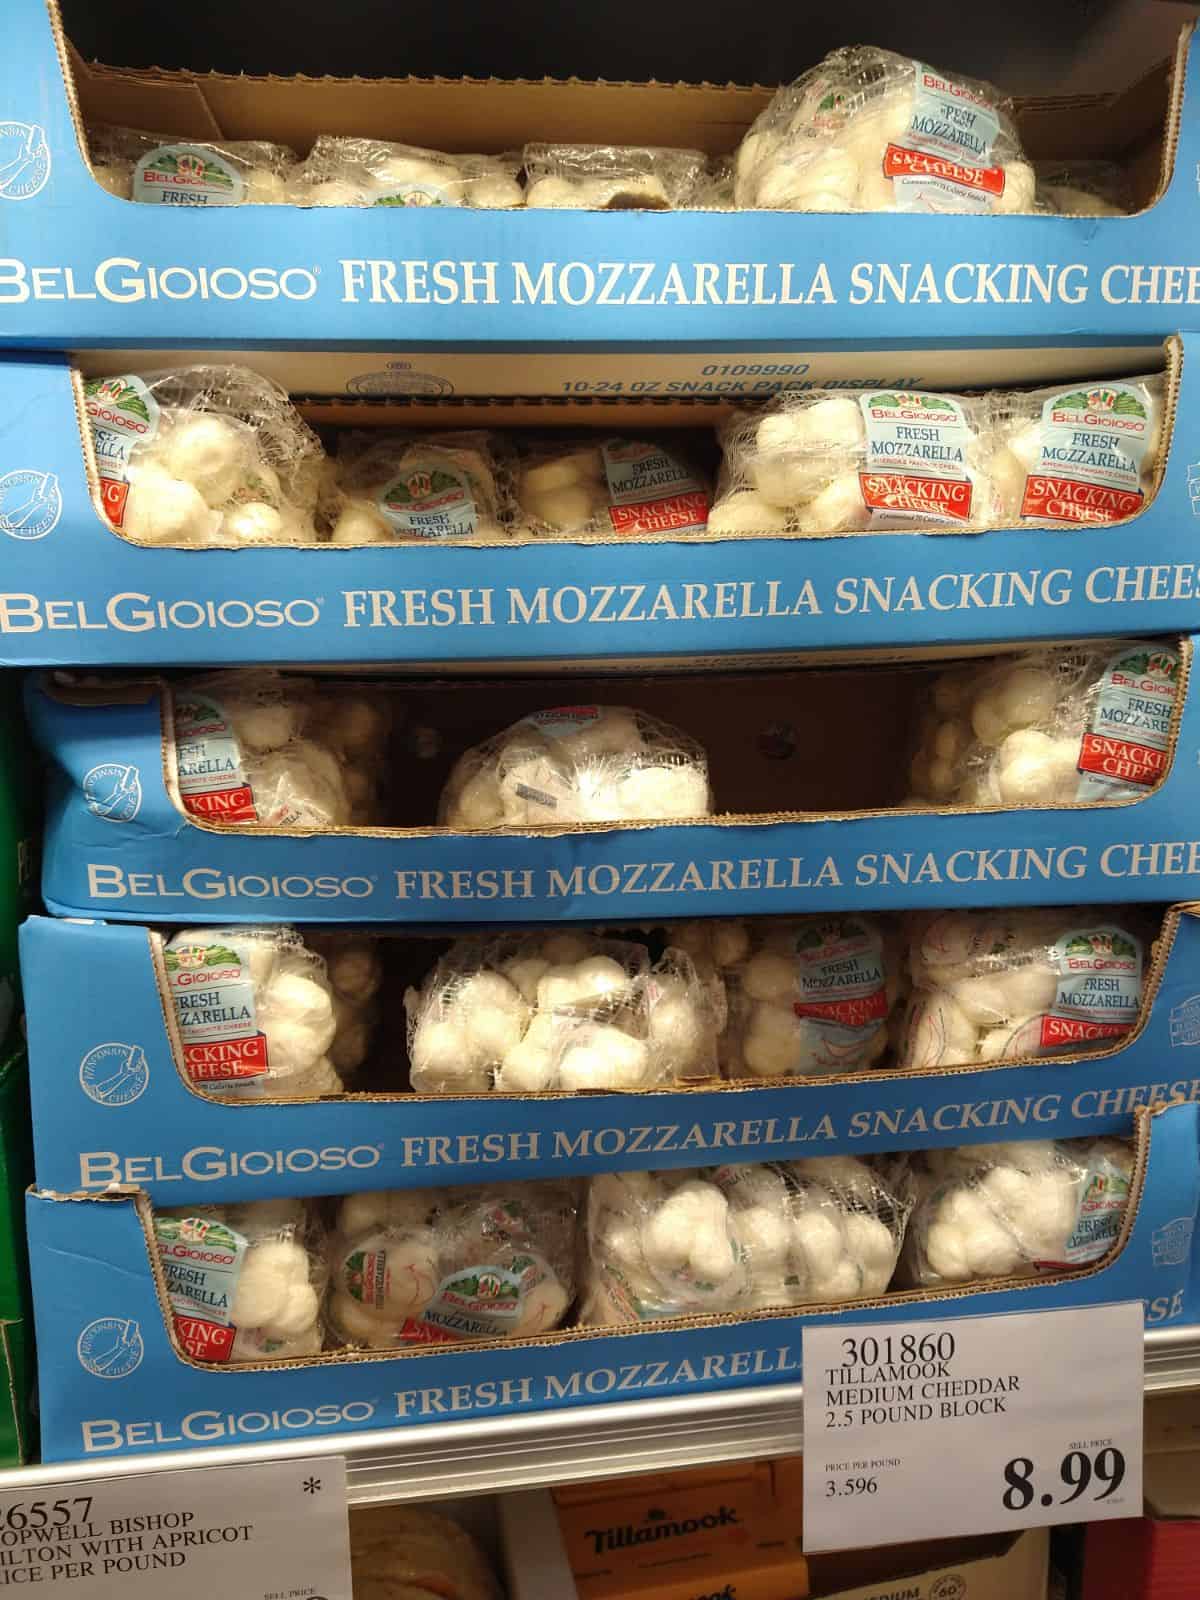 Blue boxes filled with bags of BelGioioso fresh mozzarella snacking cheese.